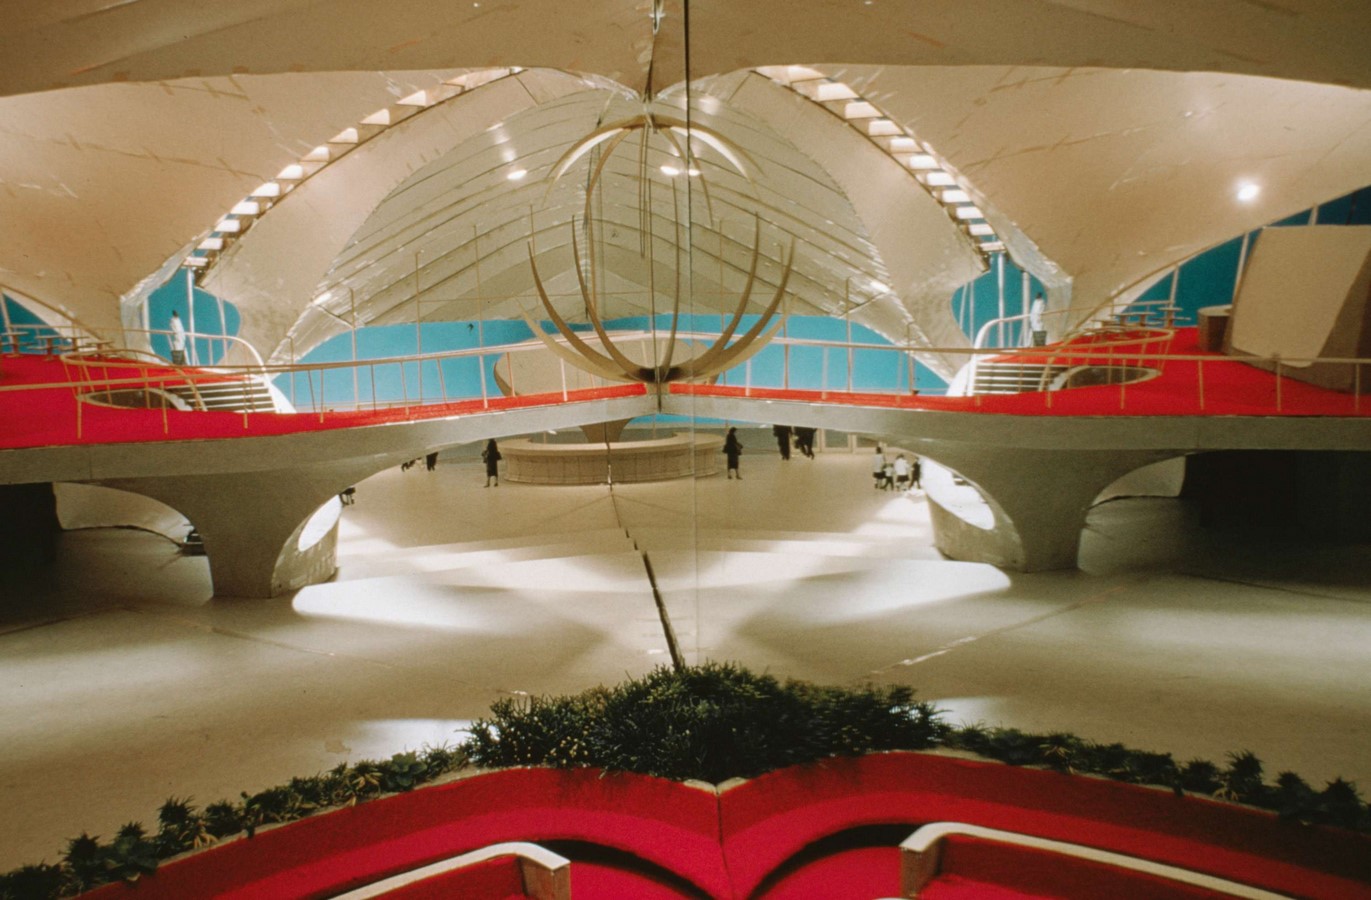 A forgotten scheme to expand the TWA Flight Center - A Visual History of  the World's Great Airports